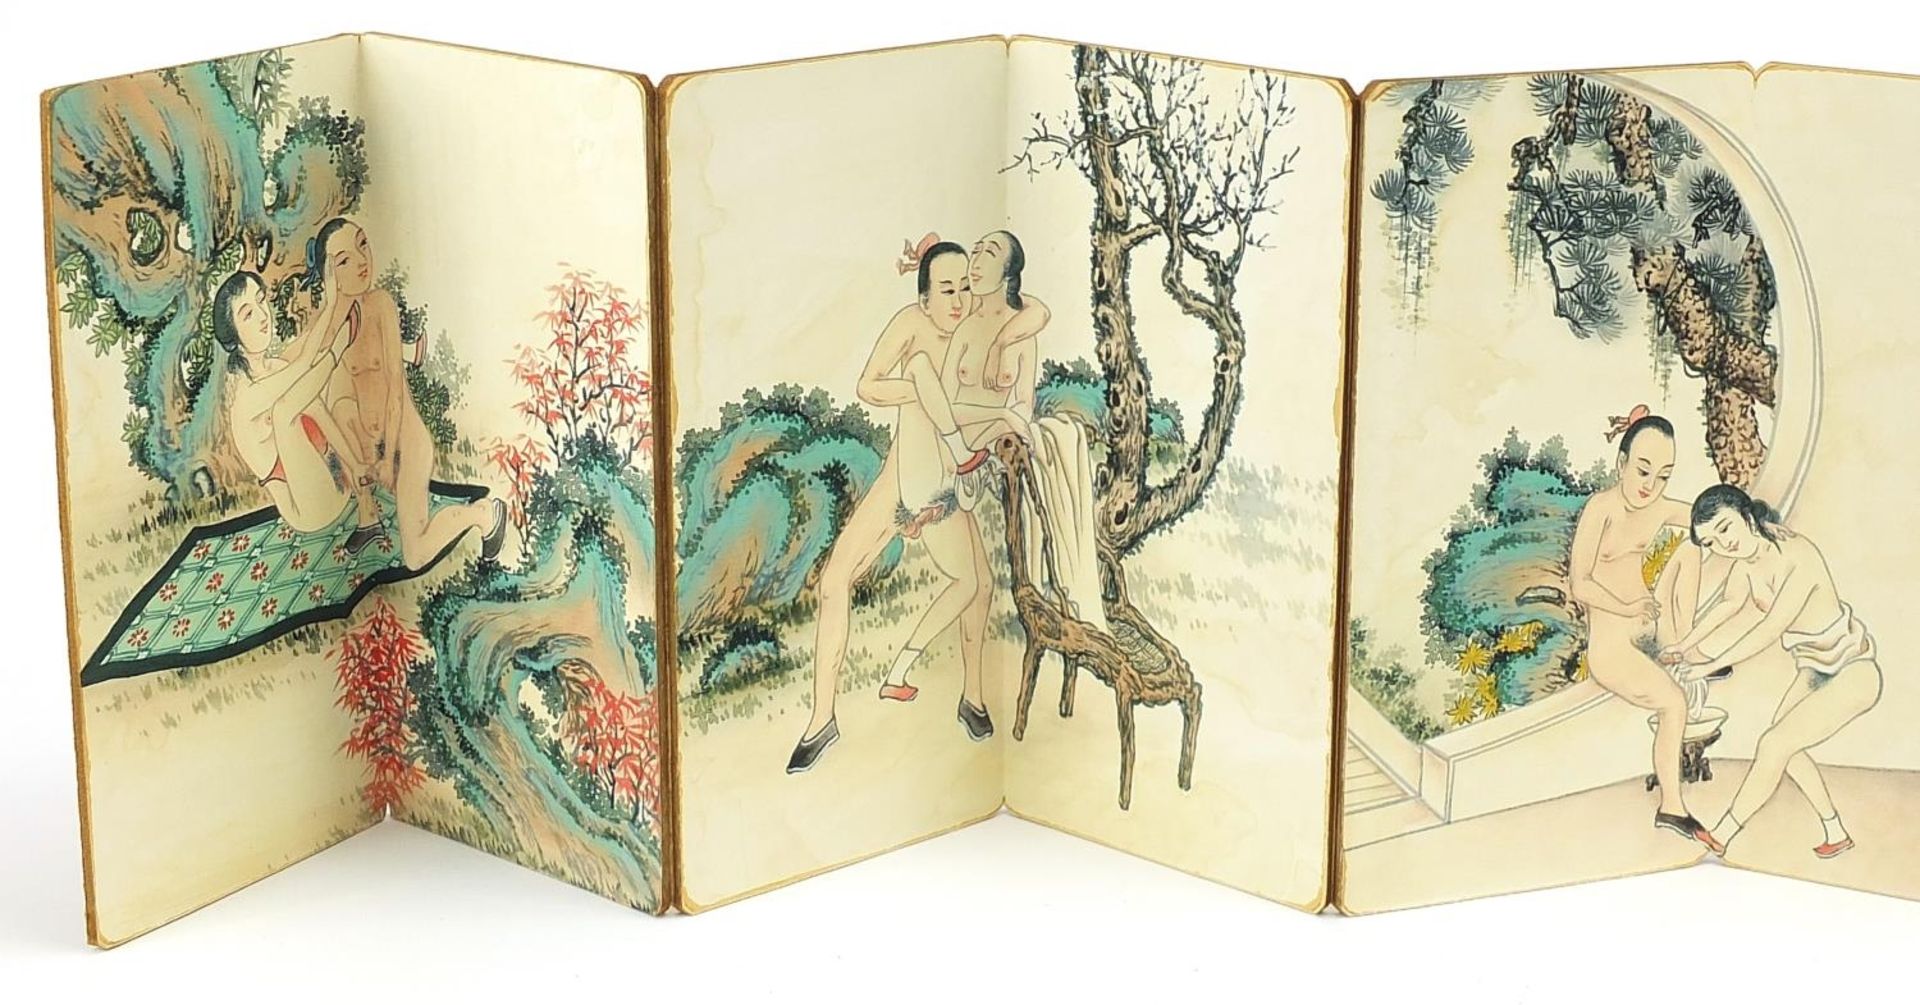 Chinese folding book depicting erotic scenes, 18cm high - Image 3 of 6